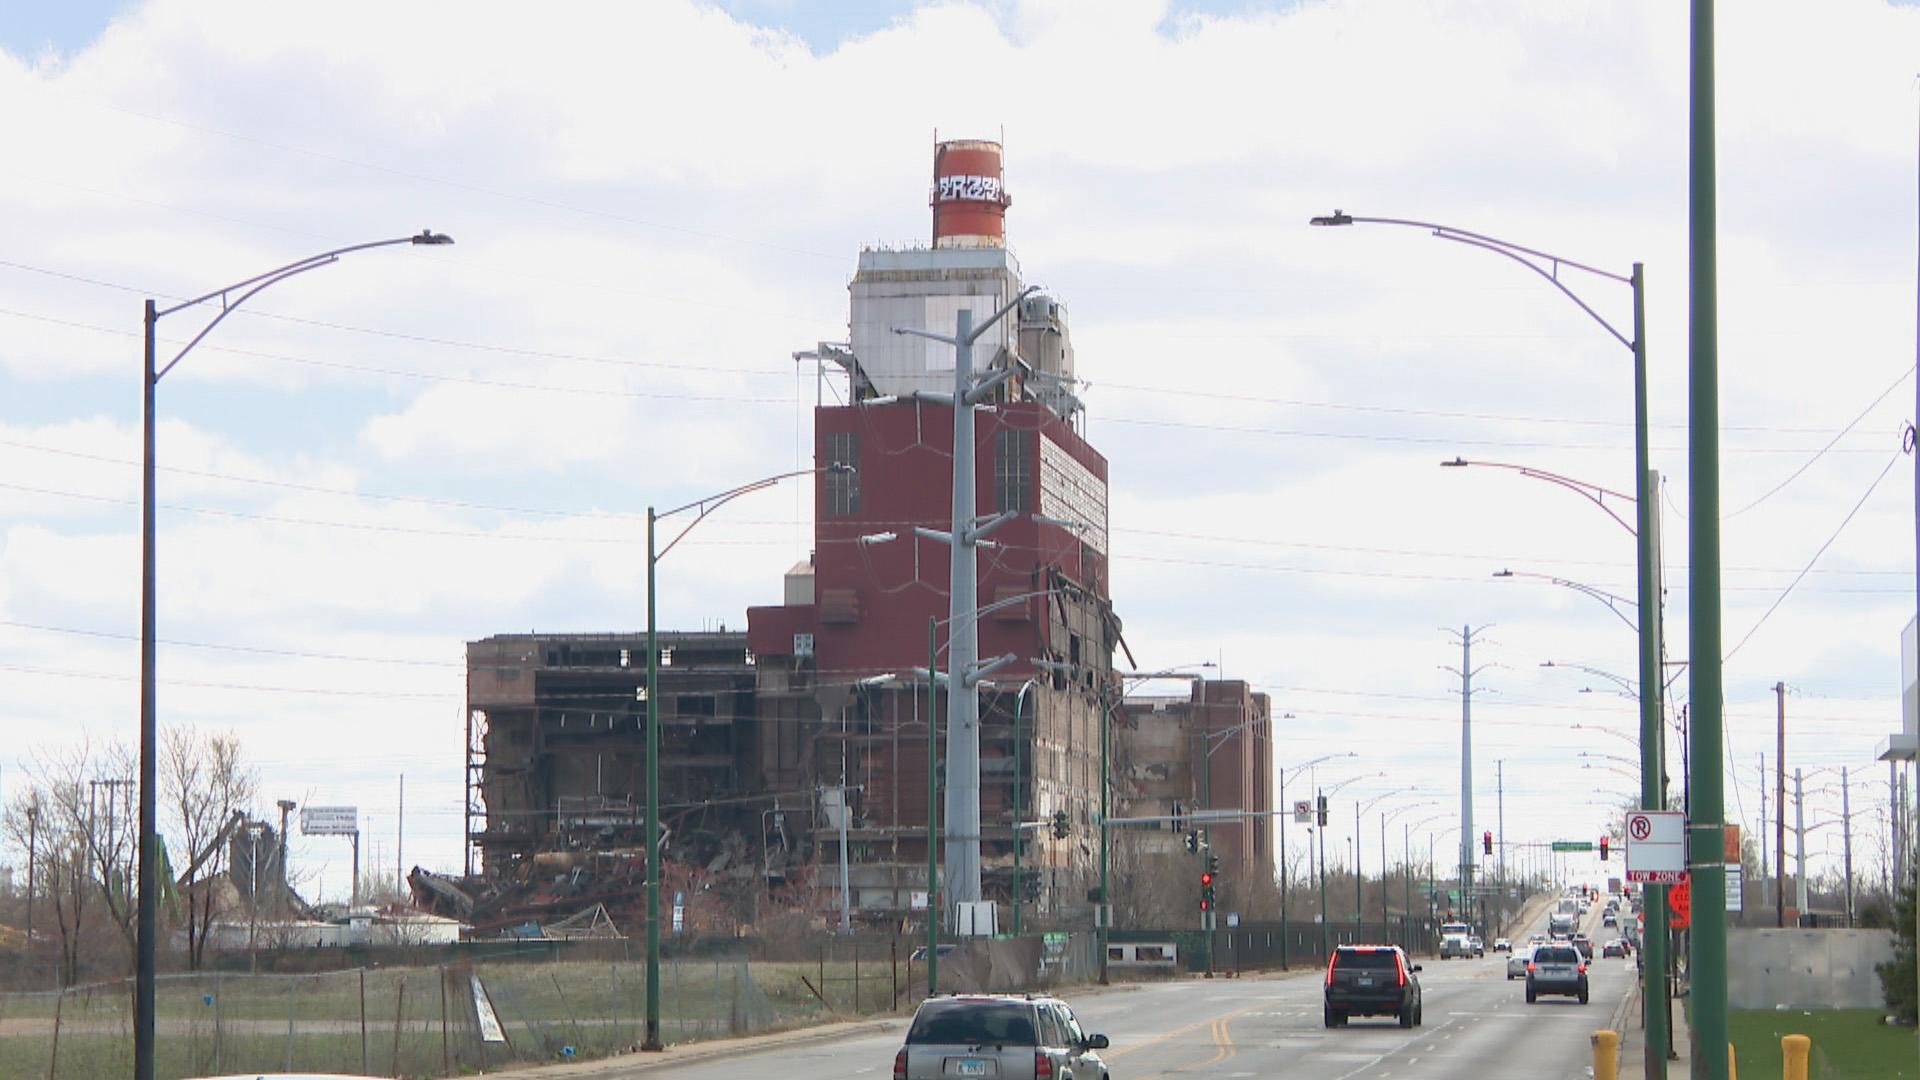 The partly demolished site of the former Crawford Power Generating Station in April 2020. (WTTW News)